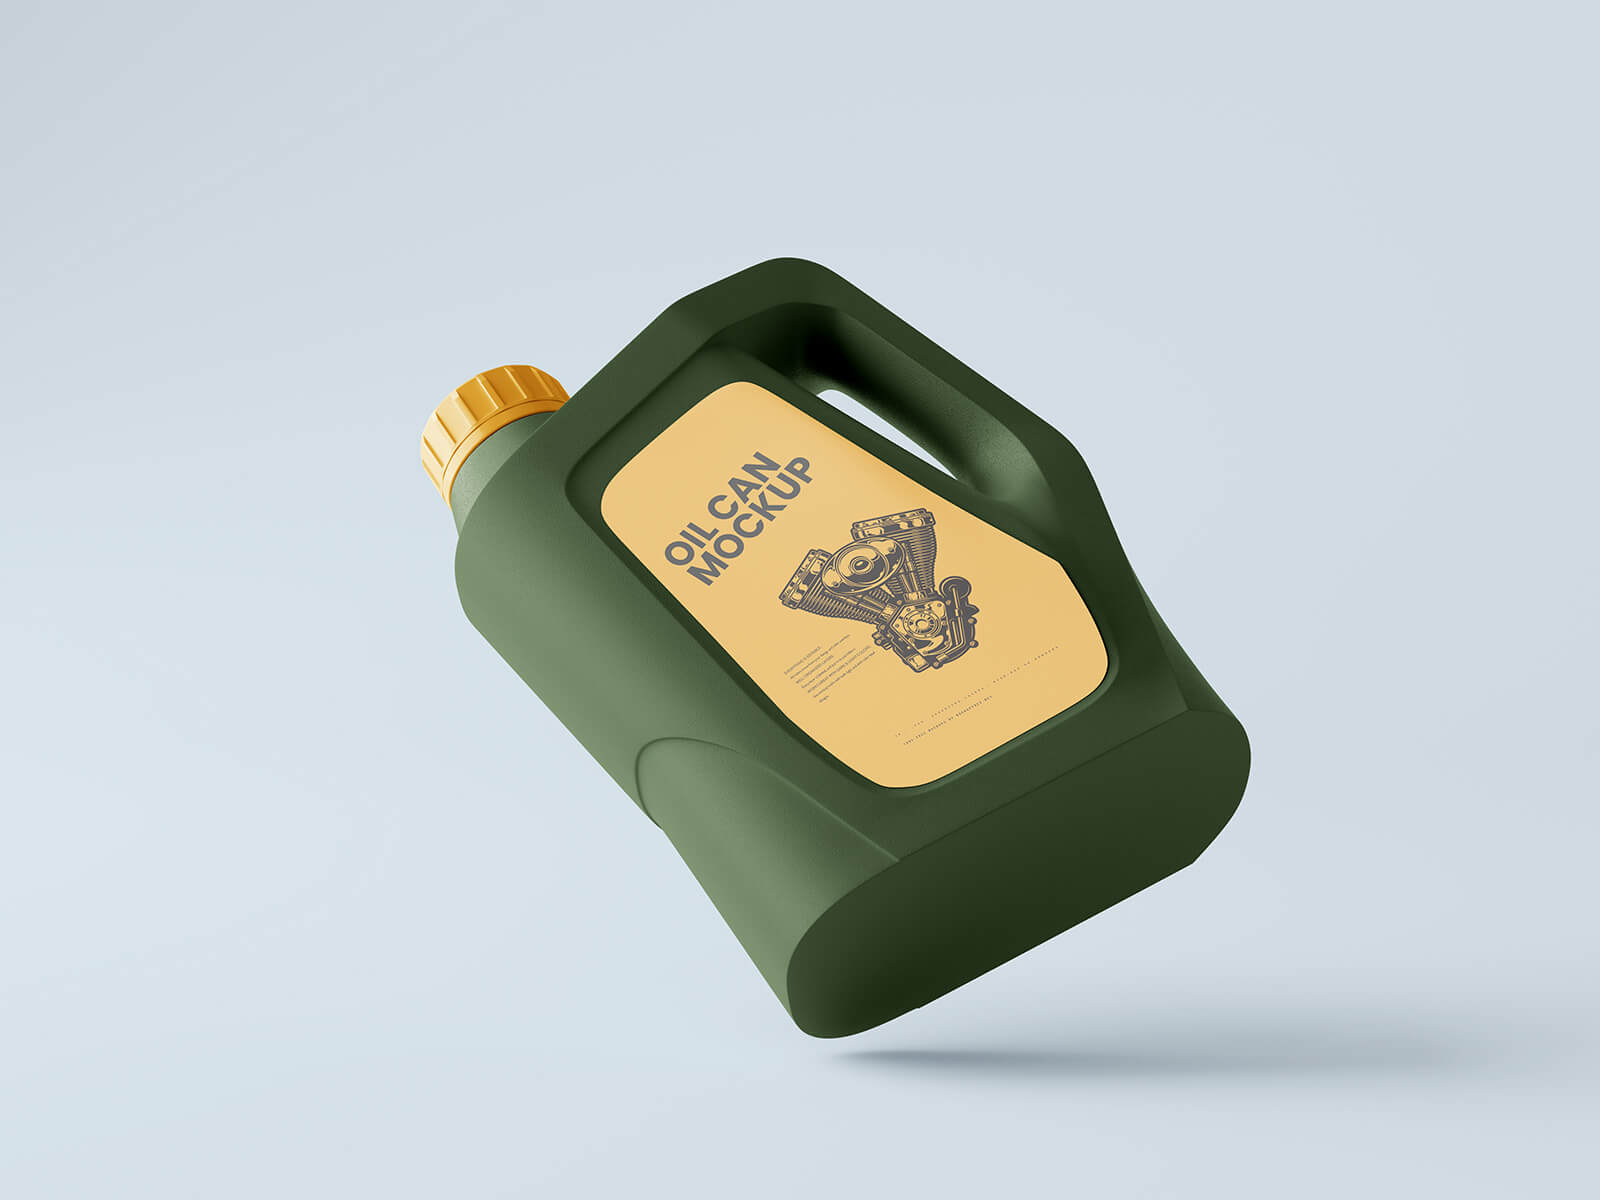 Free Engine Oil Can Mockup PSD